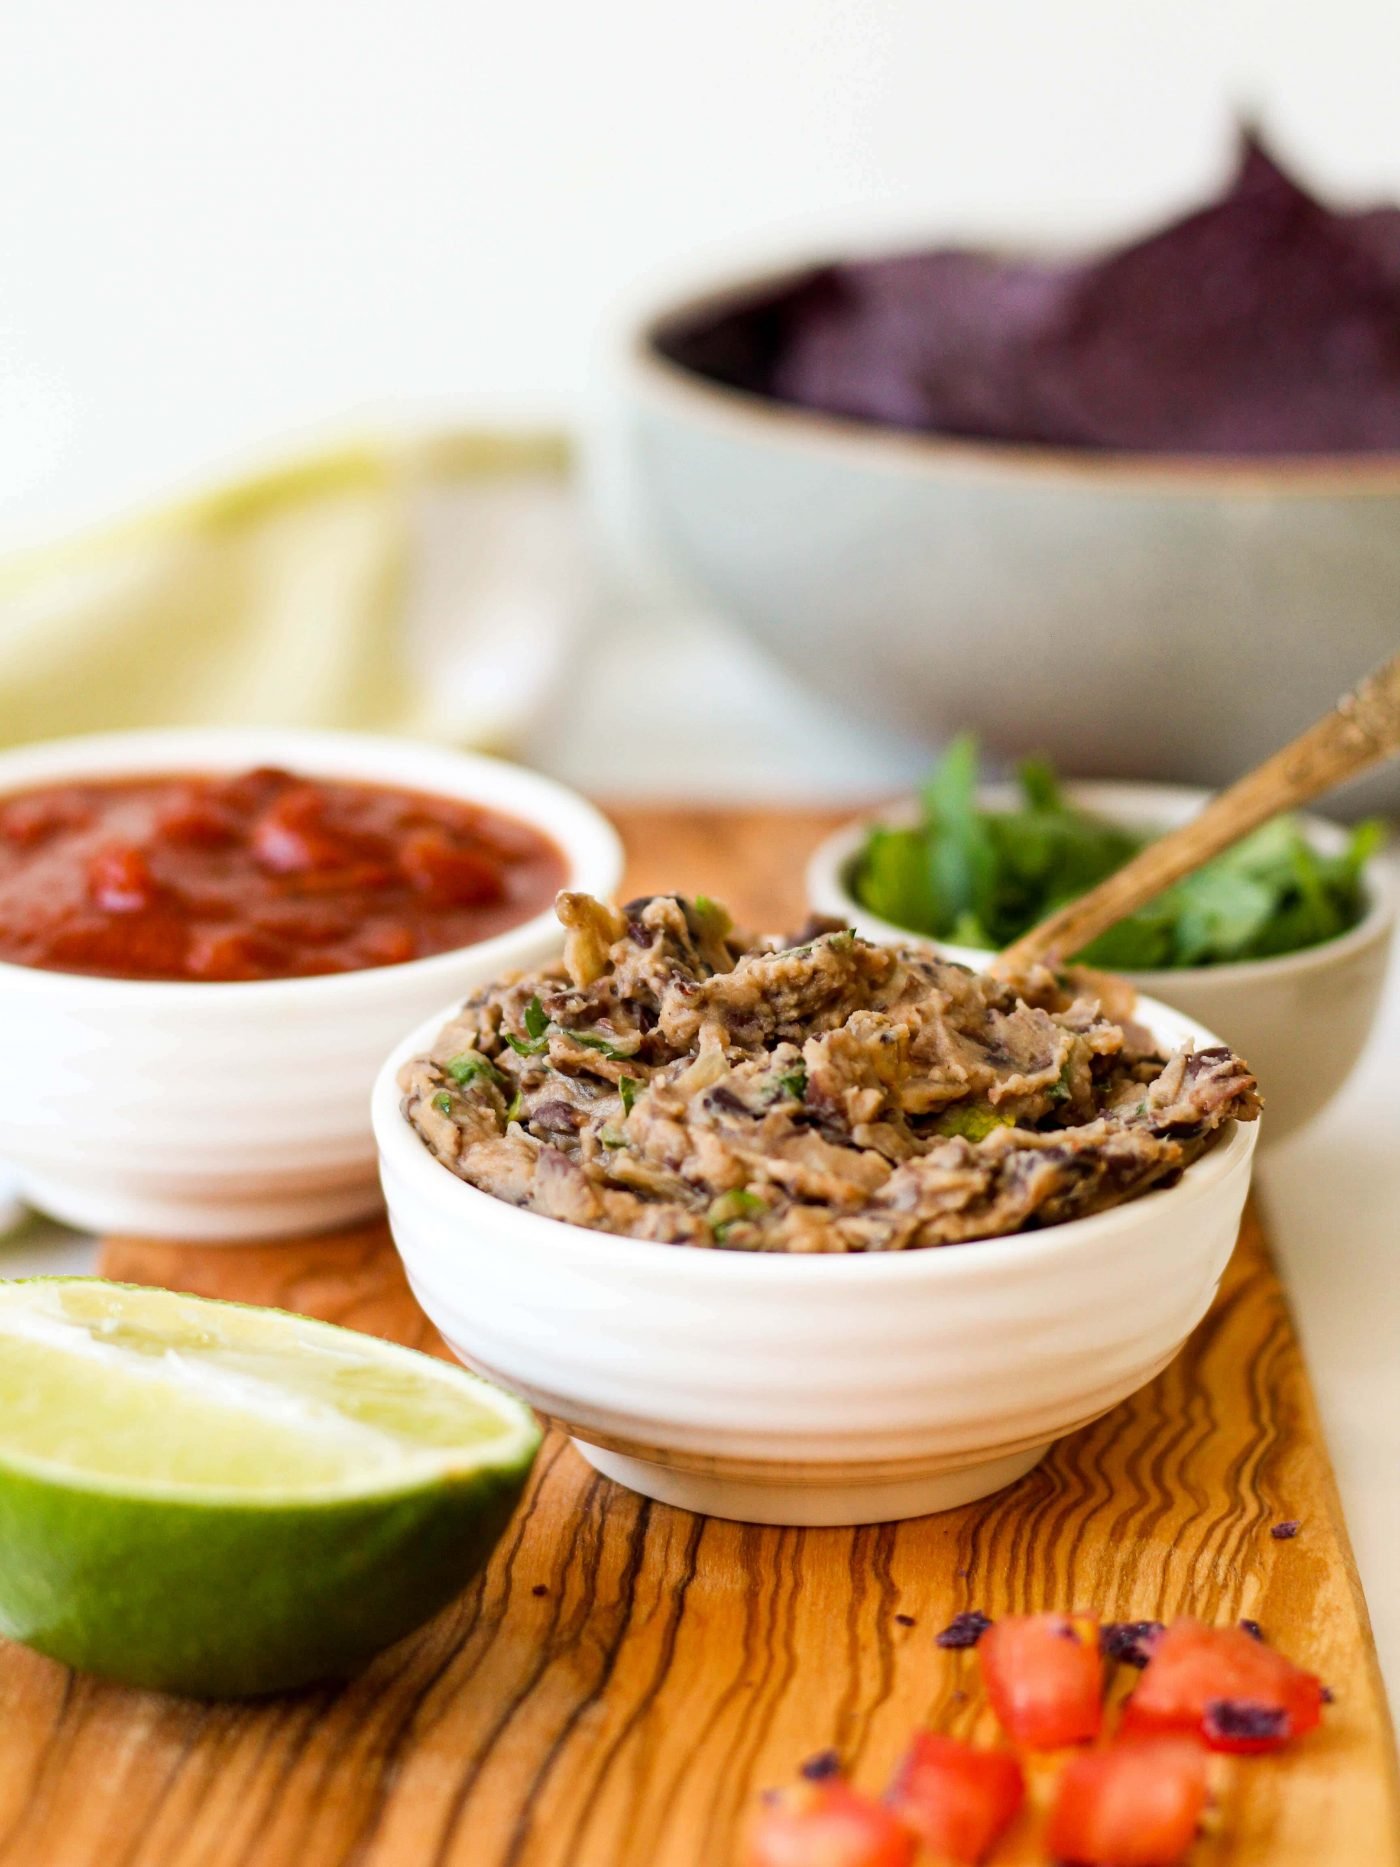 This super easy, healthy refried black beans recipe is the key to all of your quick weeknight meals! Just spread it onto a tortilla, taco shell, or salad with veggies and you've got a protein-packed, plant-based meal!